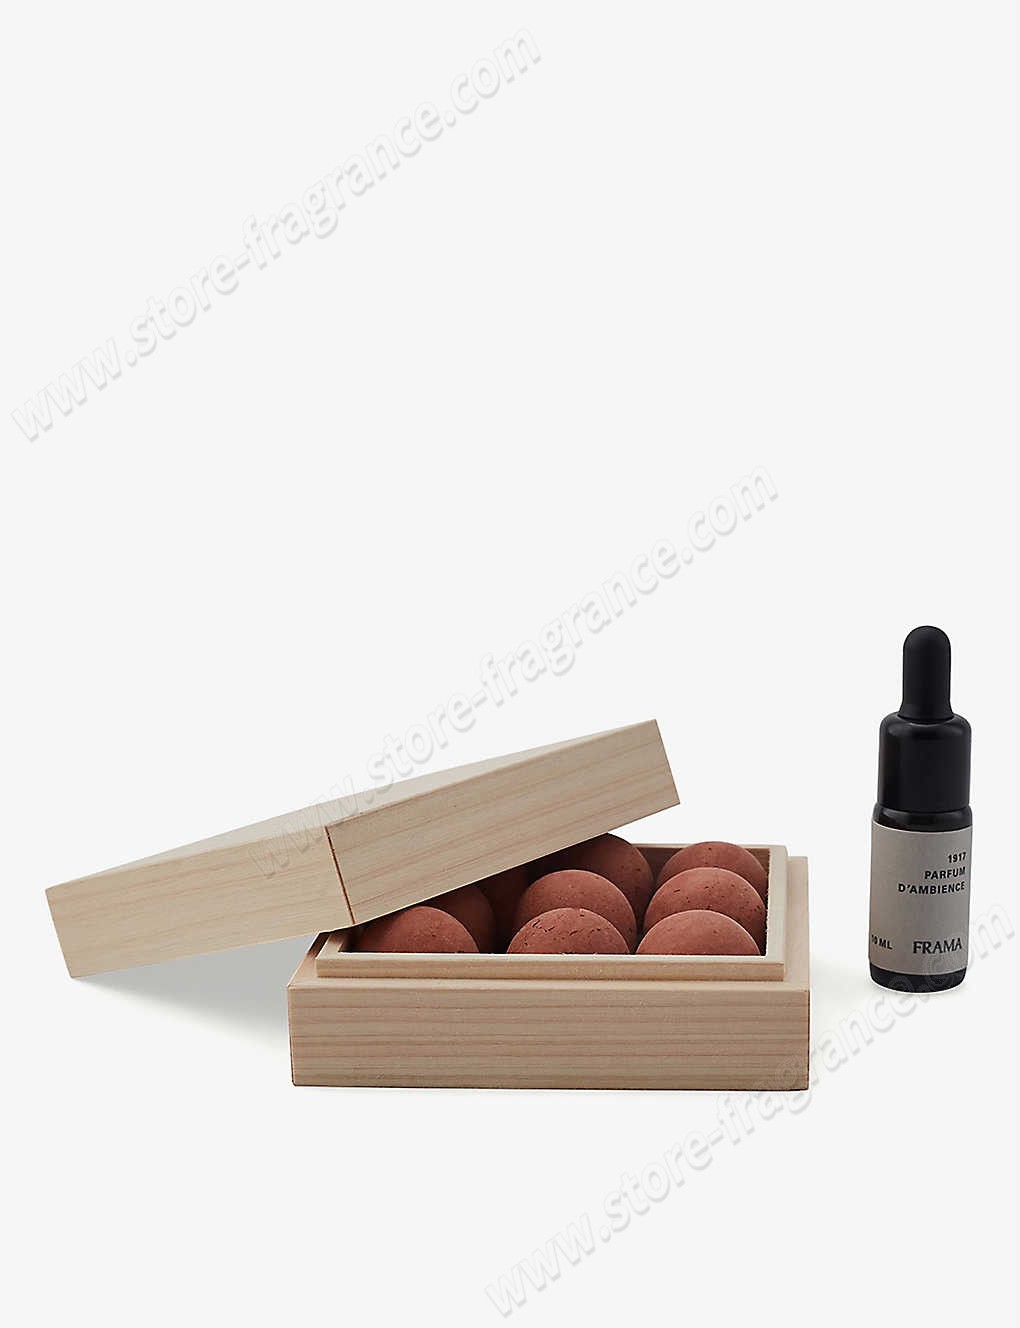 FRAMA/1917 From Soil To Form natural room diffuser Limit Offer - -1